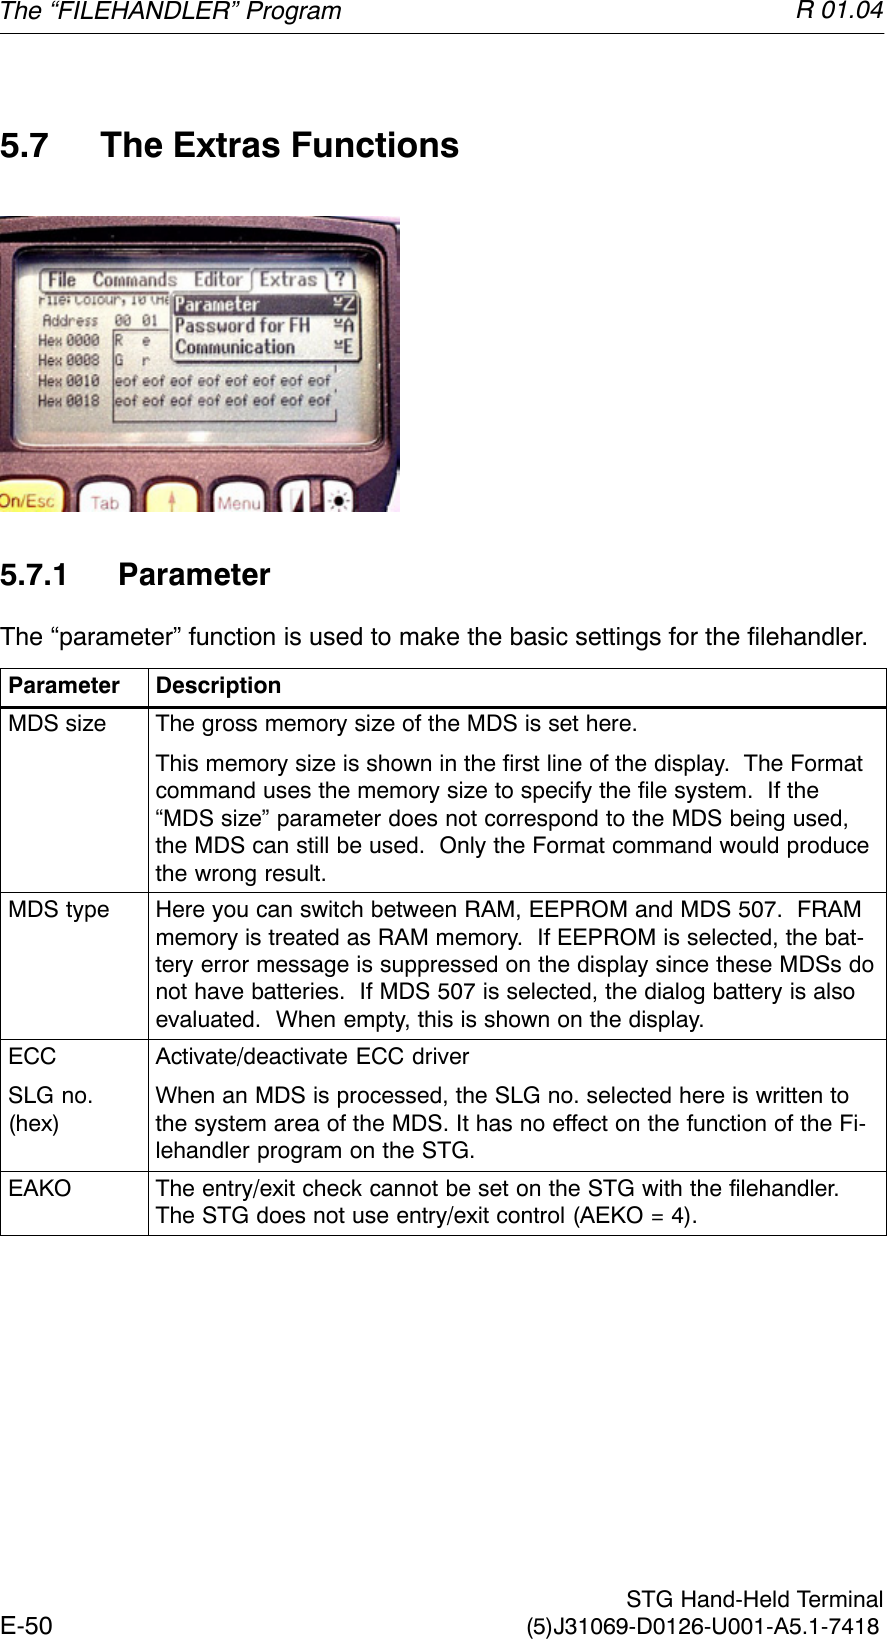 R 01.04E-50  STG Hand-Held Terminal(5)J31069-D0126-U001-A5.1-74185.7 The Extras Functions5.7.1 ParameterThe “parameter” function is used to make the basic settings for the filehandler.Parameter DescriptionMDS size The gross memory size of the MDS is set here.This memory size is shown in the first line of the display.  The Formatcommand uses the memory size to specify the file system.  If the“MDS size” parameter does not correspond to the MDS being used,the MDS can still be used.  Only the Format command would producethe wrong result.MDS type Here you can switch between RAM, EEPROM and MDS 507.  FRAMmemory is treated as RAM memory.  If EEPROM is selected, the bat-tery error message is suppressed on the display since these MDSs donot have batteries.  If MDS 507 is selected, the dialog battery is alsoevaluated.  When empty, this is shown on the display.ECCSLG no.(hex)Activate/deactivate ECC driverWhen an MDS is processed, the SLG no. selected here is written tothe system area of the MDS. It has no effect on the function of the Fi-lehandler program on the STG.EAKO The entry/exit check cannot be set on the STG with the filehandler.The STG does not use entry/exit control (AEKO = 4).The “FILEHANDLER” Program